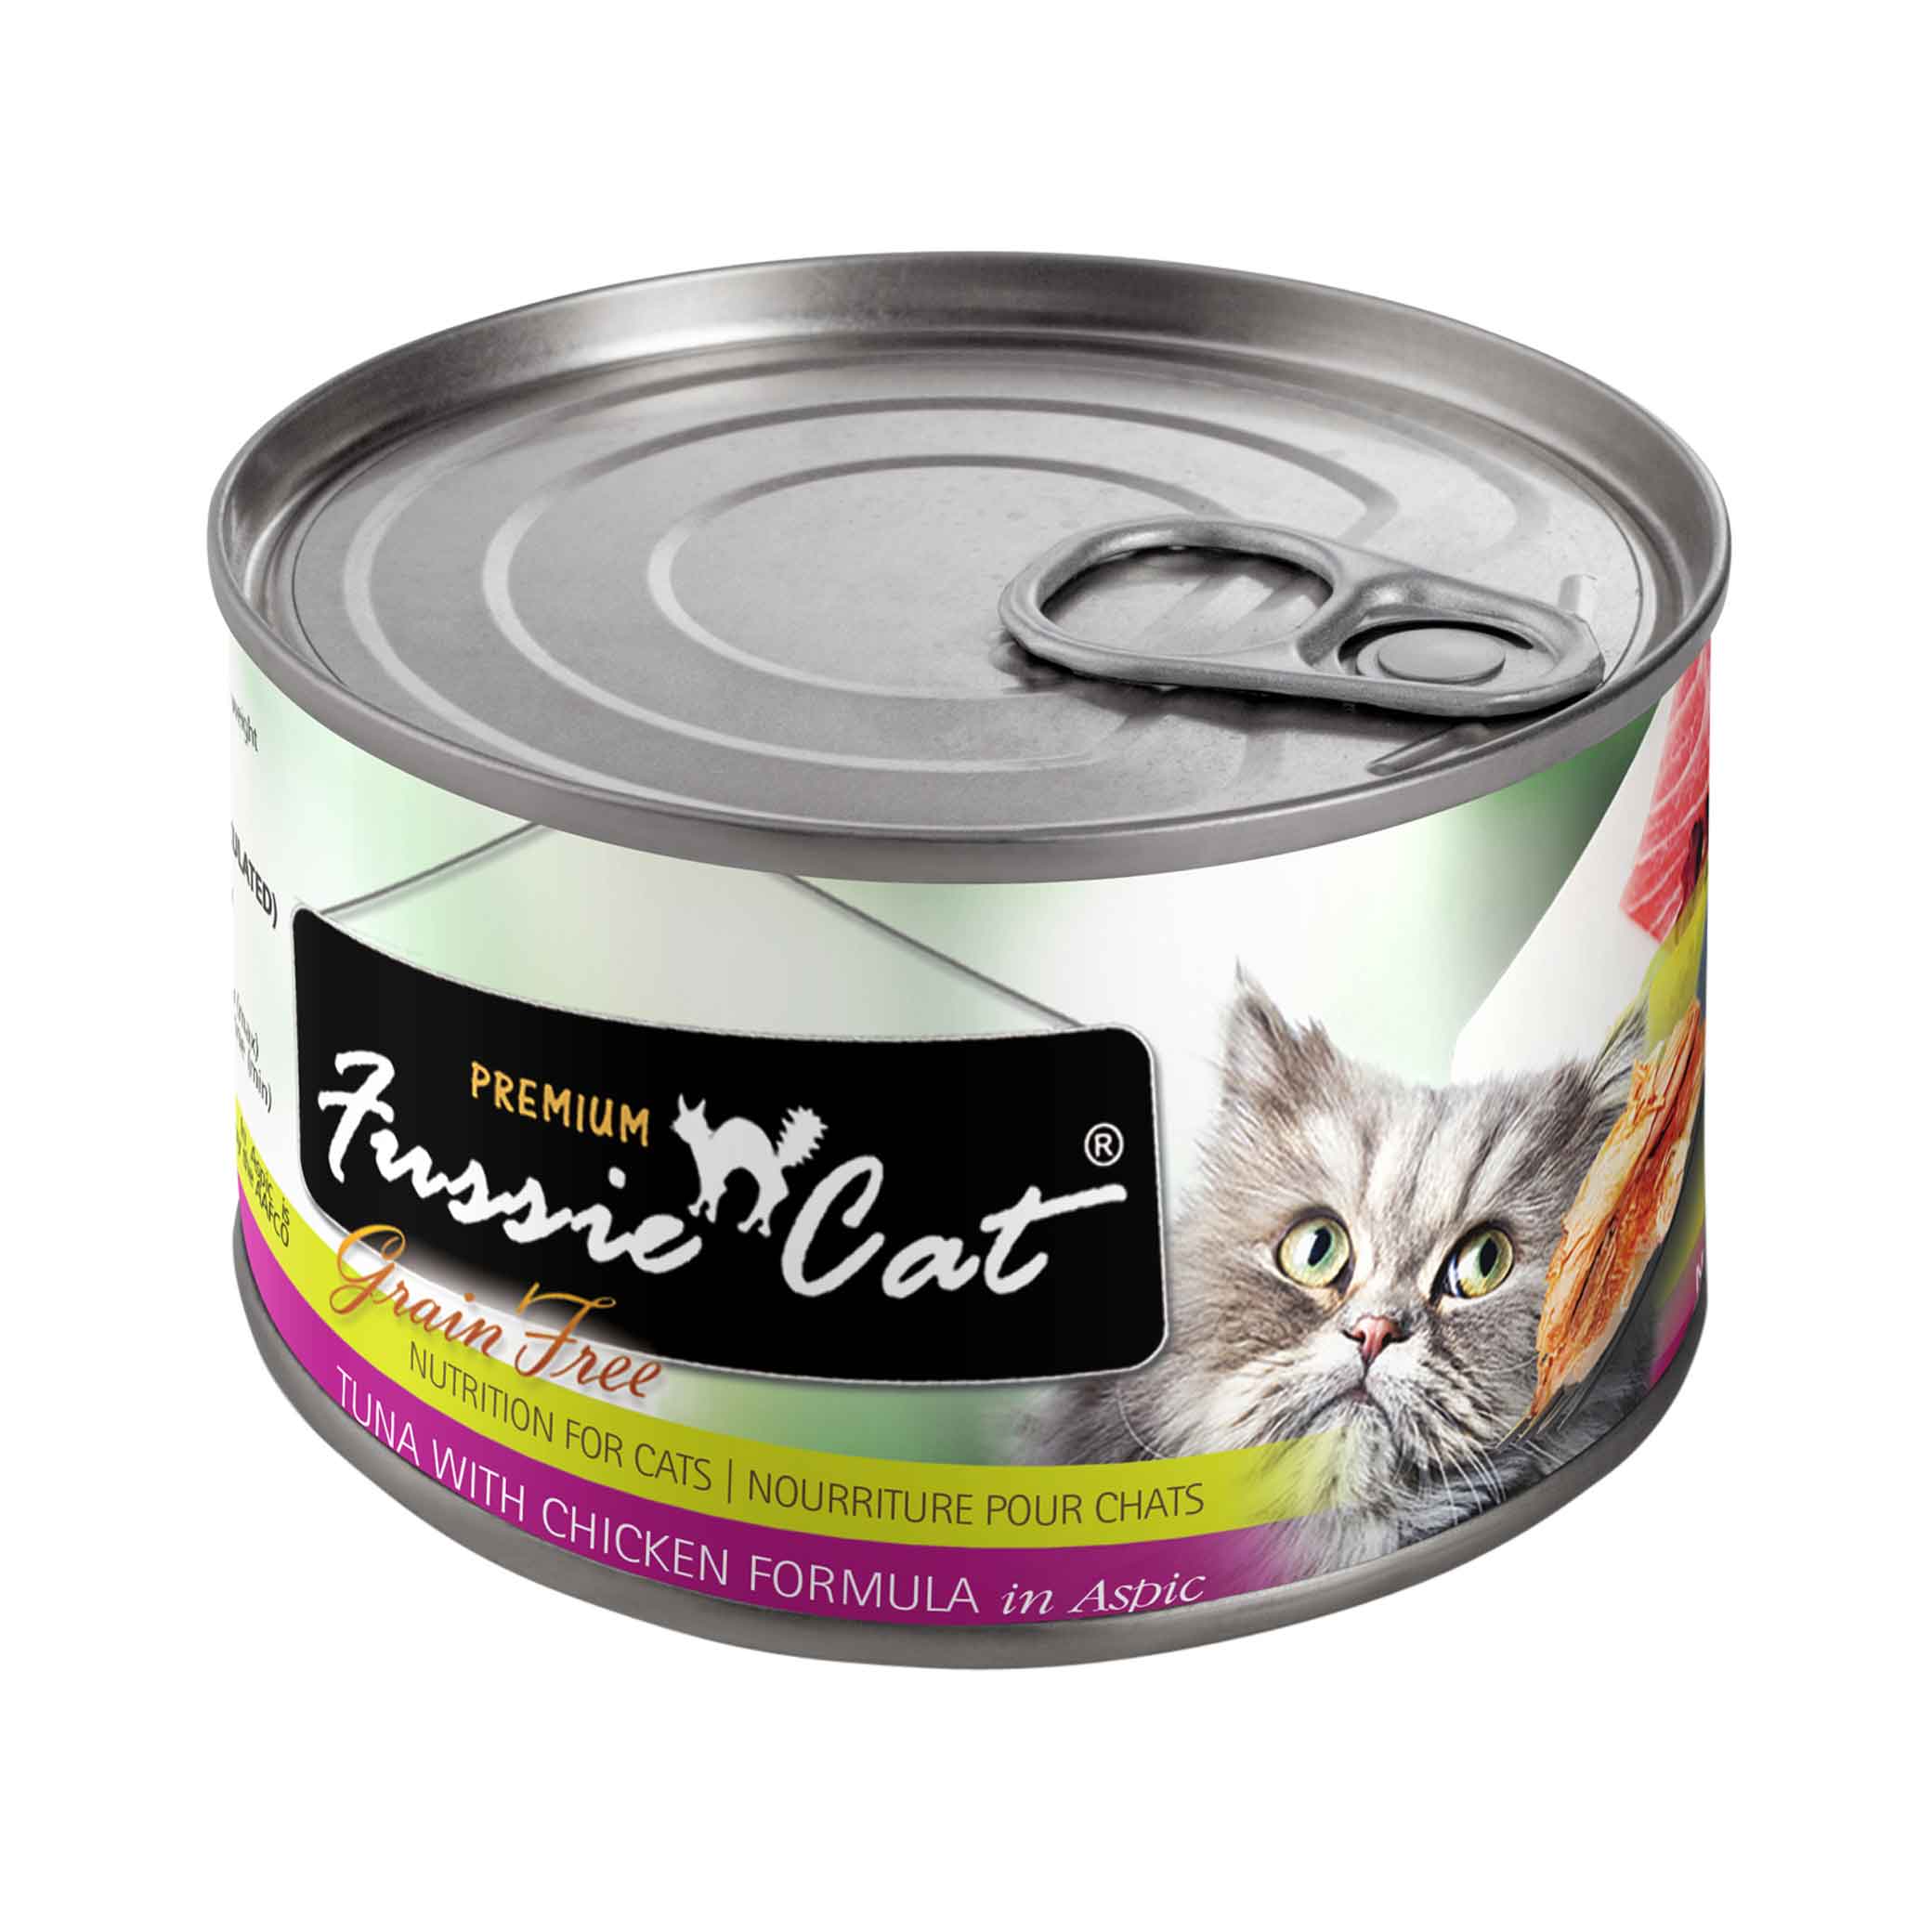 Fussie Cat Premium Grain-Free Tuna With Chicken Canned Cat Food, 5.5 Ounces